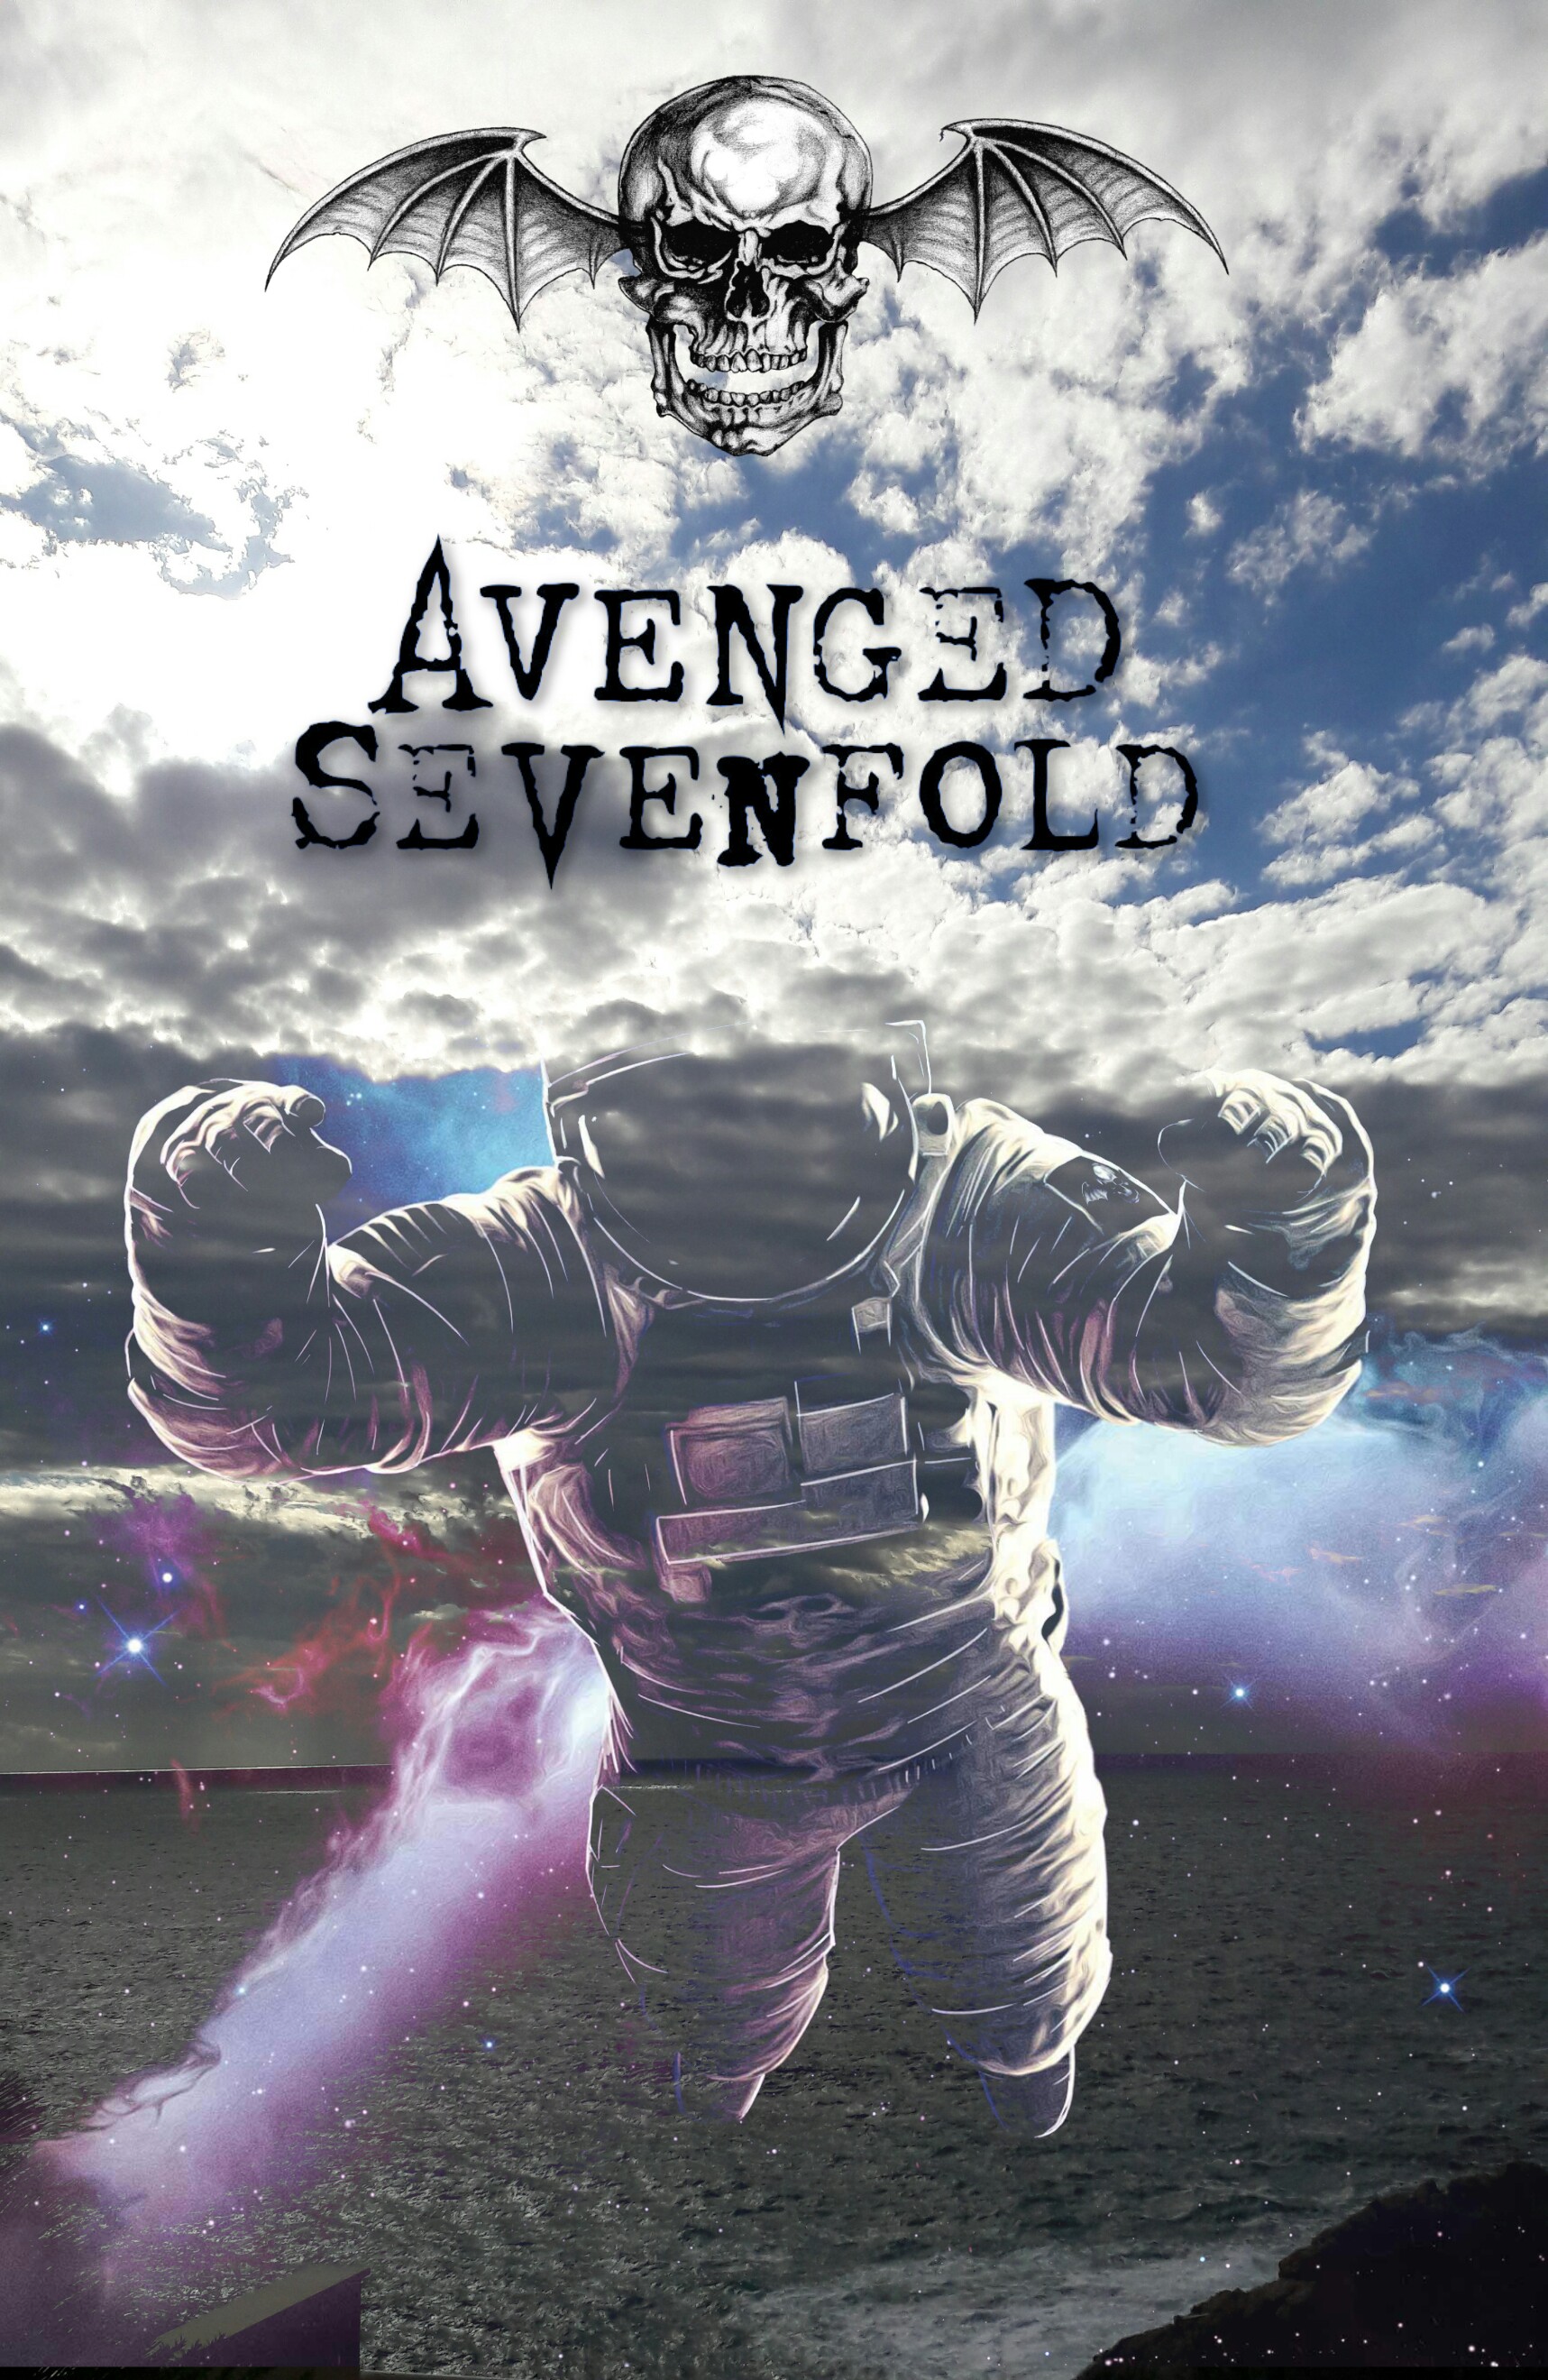 avenged sevenfold wallpaper,cool,poster,fictional character,fiction,graphic design